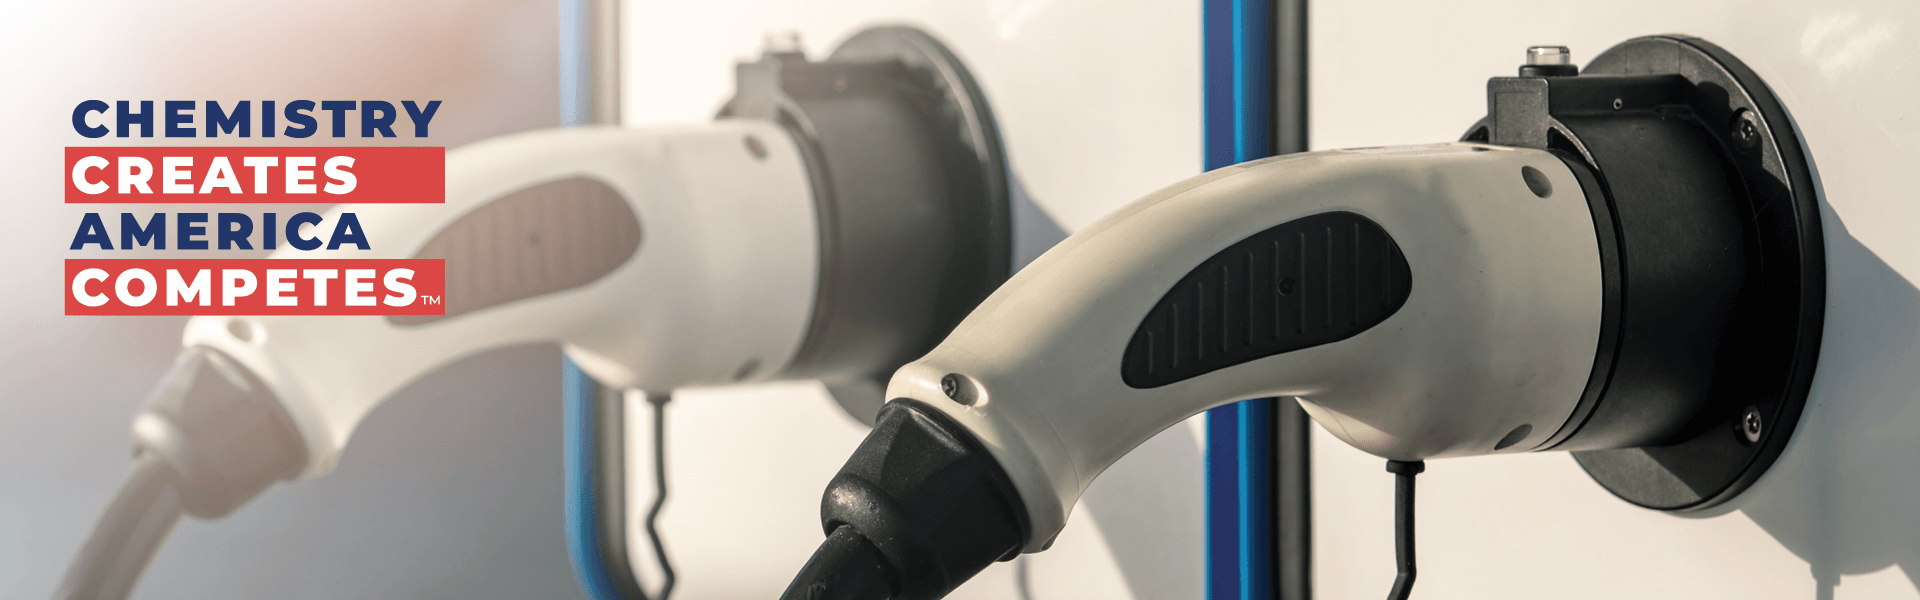 Chemistry Creates America Competes Two Electric Vehicle Chargers